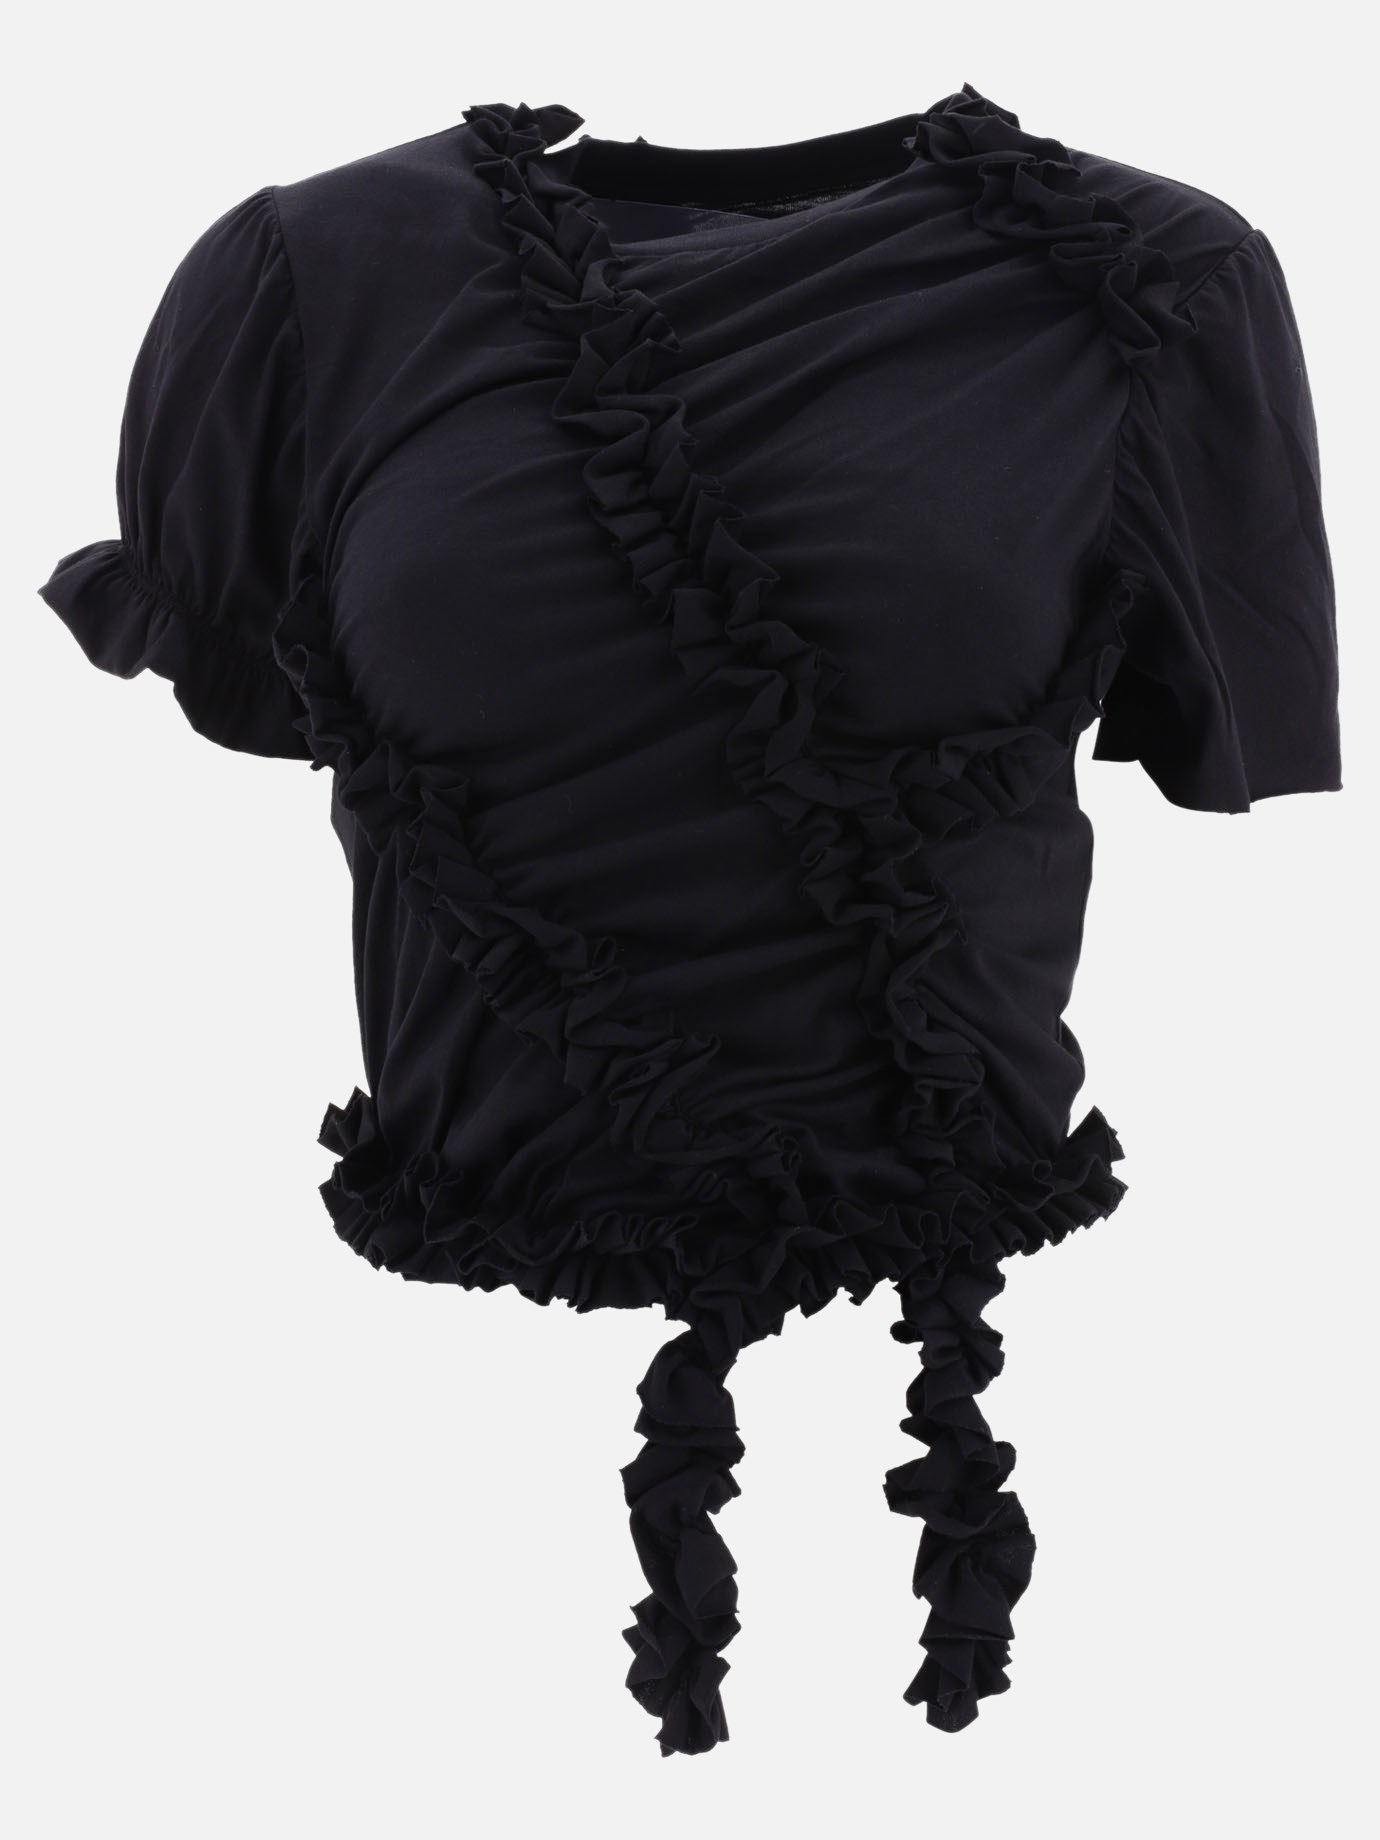 Top with ruffles